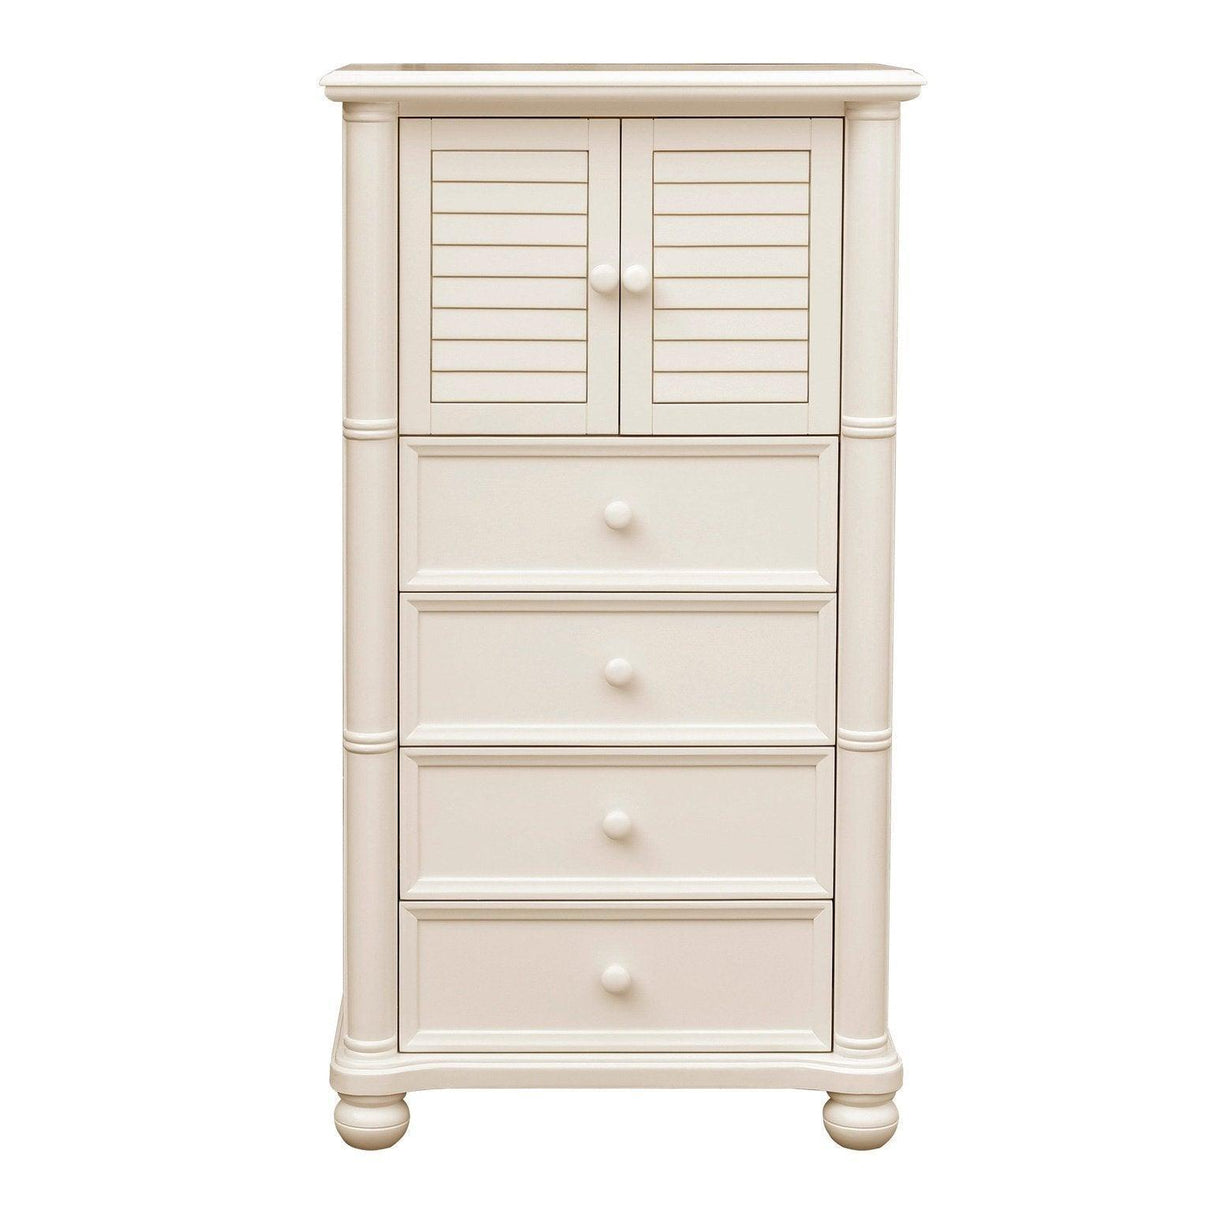 Sunset Trading Ice Cream at the Beach 5 Piece King Bedroom Set | Bed Dresser Mirror Storage Chest Nightstand CF-1702-0111-K5P - Bedroom Depot USA